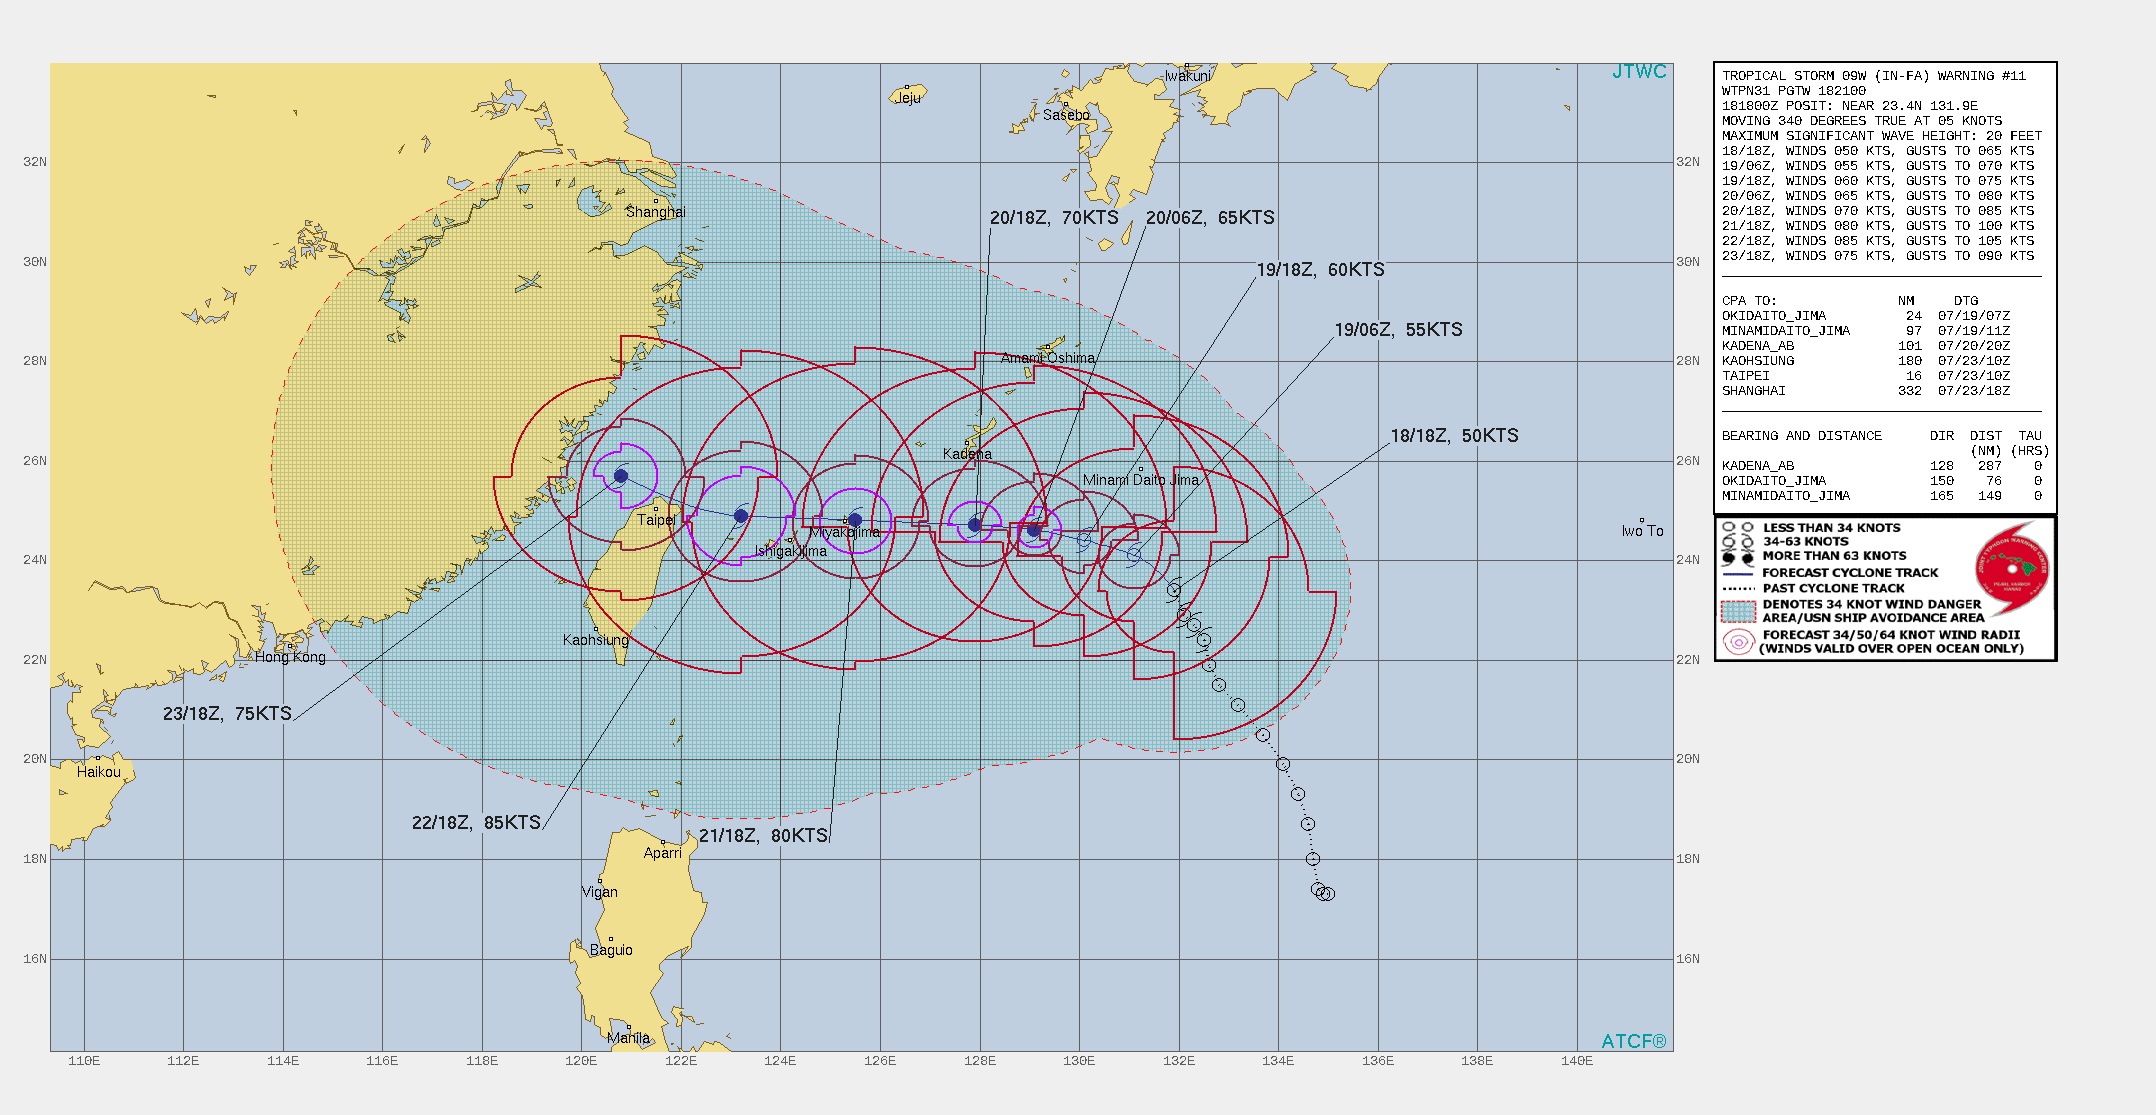 TS 09W(IN-FA). WARNING 11 ISSUED AT 18/21UTC.THERE ARE NO SIGNIFICANT CHANGES TO THE FORECAST FROM THE PREVIOUS WARNING.  FORECAST DISCUSSION: UNCERTAINTY IN INITIAL POSITION IS RESULTING IN SLIGHT SHIFTS IN THE FORECAST, AND NUMERICAL GUIDANCE IS LIKELY HAVING SIMILAR ISSUES. THE SYSTEM IS EXPECTED TO TRACK WEST-NORTHWESTWARD TO WESTWARD ALONG THE SOUTHERN PERIPHERY OF THE SUBTROPICAL RIDGE THROUGH THE FORECAST PERIOD. ADDITIONAL CONSOLIDATION AND INTENSIFICATION IS EXPECTED AS THE DEEP UPPER LOW IN THE WEST SEA CONTINUES TO FILL AND DRIFT POLEWARD, ENHANCING POLEWARD OUTFLOW.  GRADUAL INTENSIFICATION IS FORECAST DUE TO THE BROAD SIZE, REACHING  A PEAK INTENSITY OF AROUND 85 KNOTS/CAT 2 AS THE SYSTEM APPROACHES TAIWAN.  AFTER 96H, INTERACTION WITH TAIWAN WILL WEAKEN THE SYSTEM  SLIGHTLY. THE DEGREE OF WEAKENING IS HIGHLY DEPENDENT ON WHETHER THE  ACTUAL TRACK TAKES IN-FA OVER LAND, OR KEEPS IT OVER WATER.